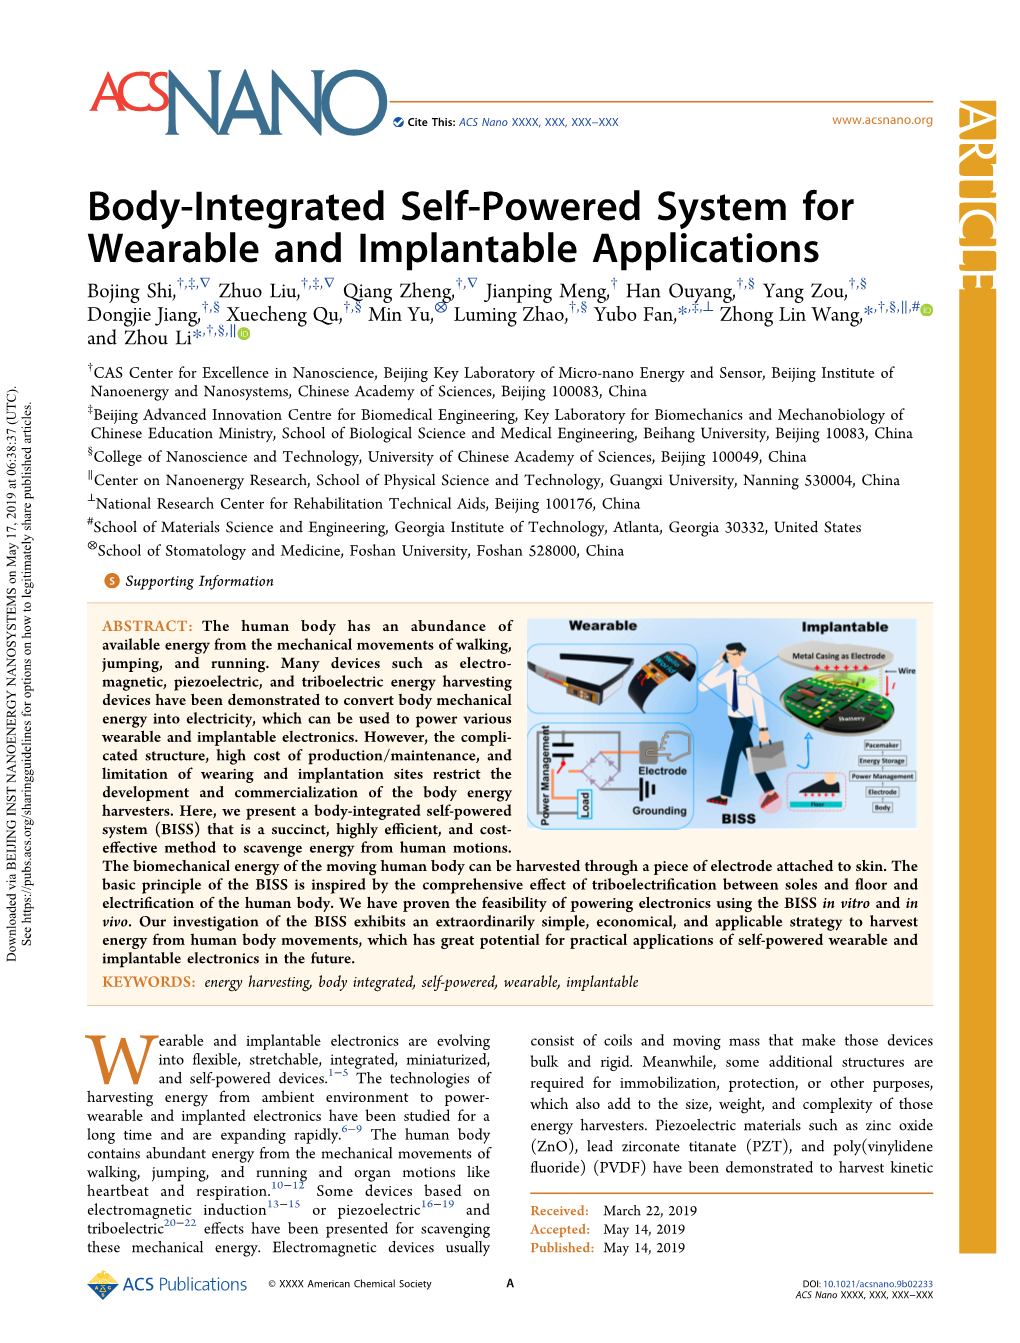 Body-Integrated Self-Powered System for Wearable and Implantable